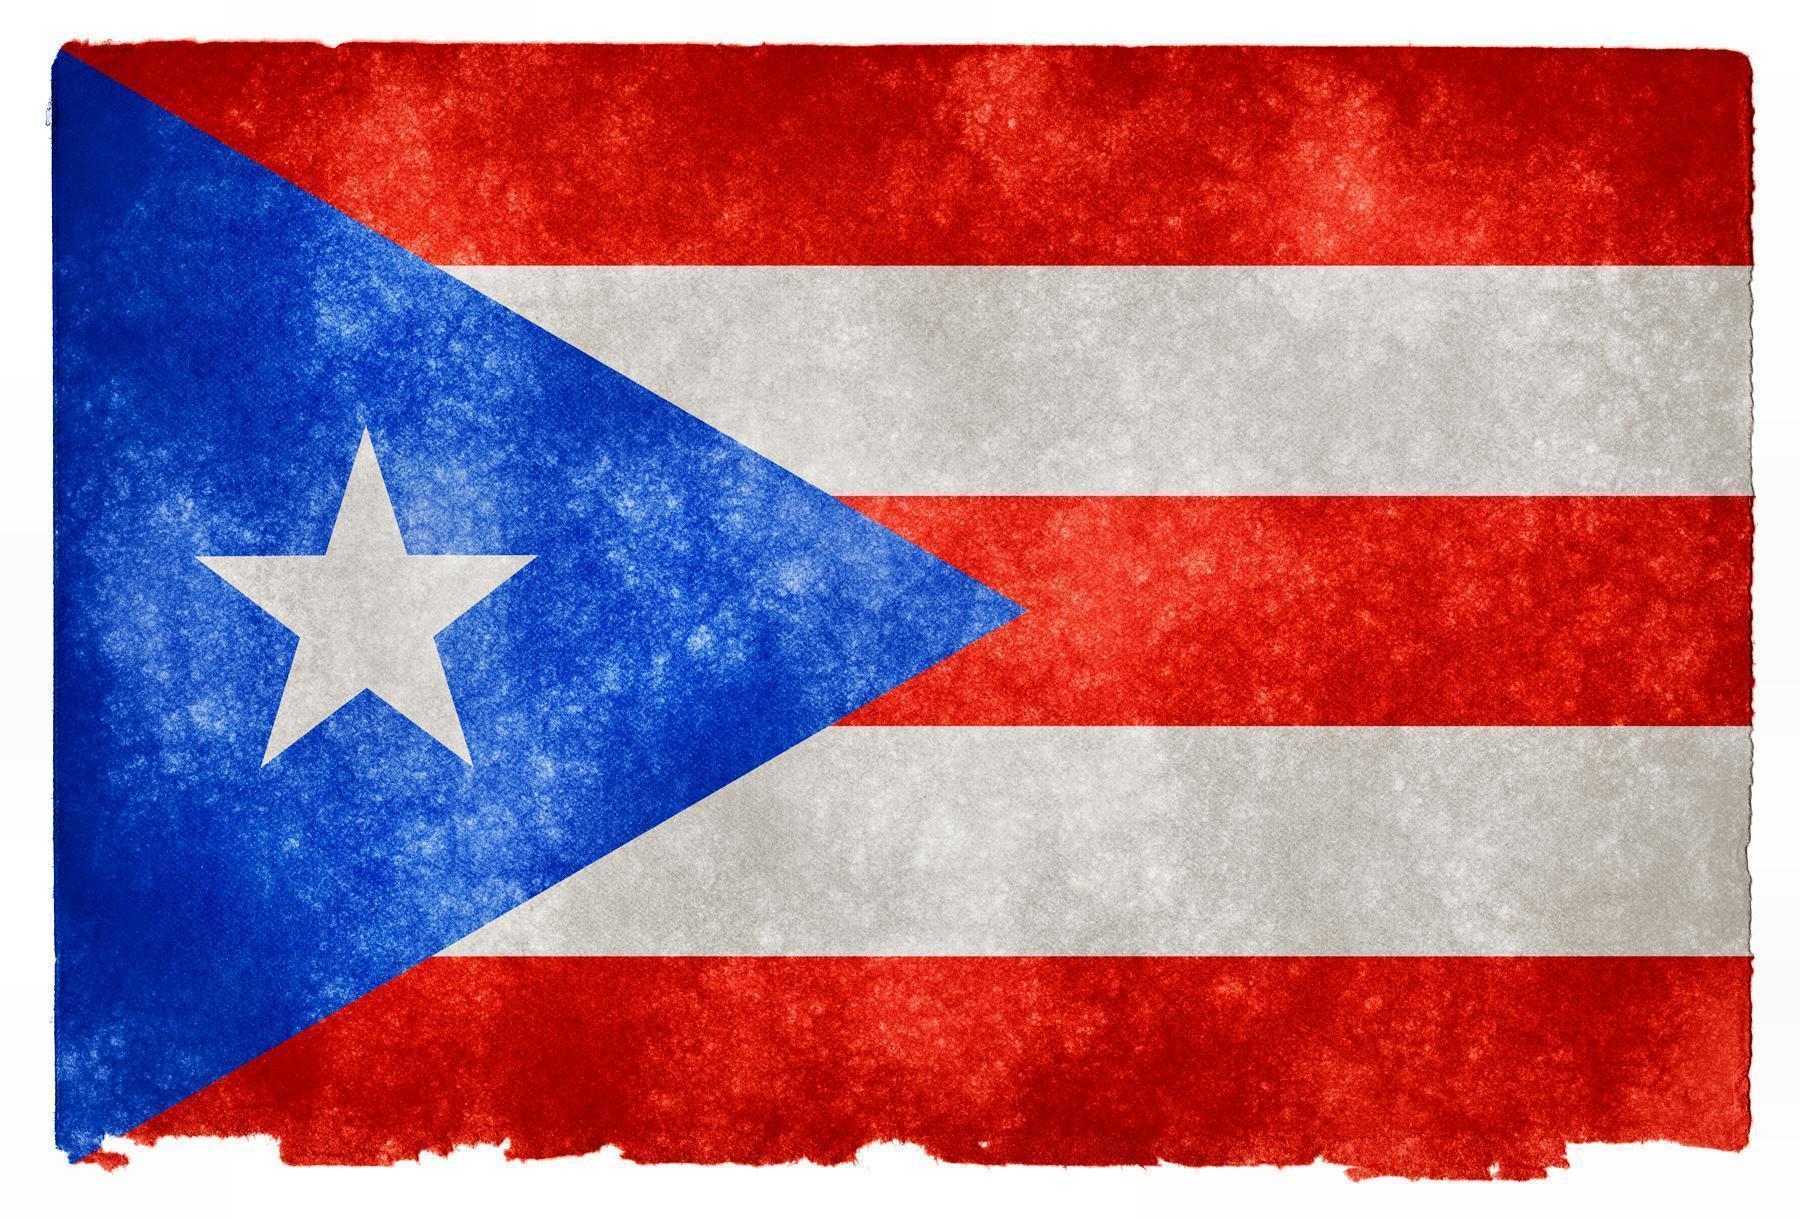 Puerto Rico Flag Wallpapers Image 20 High